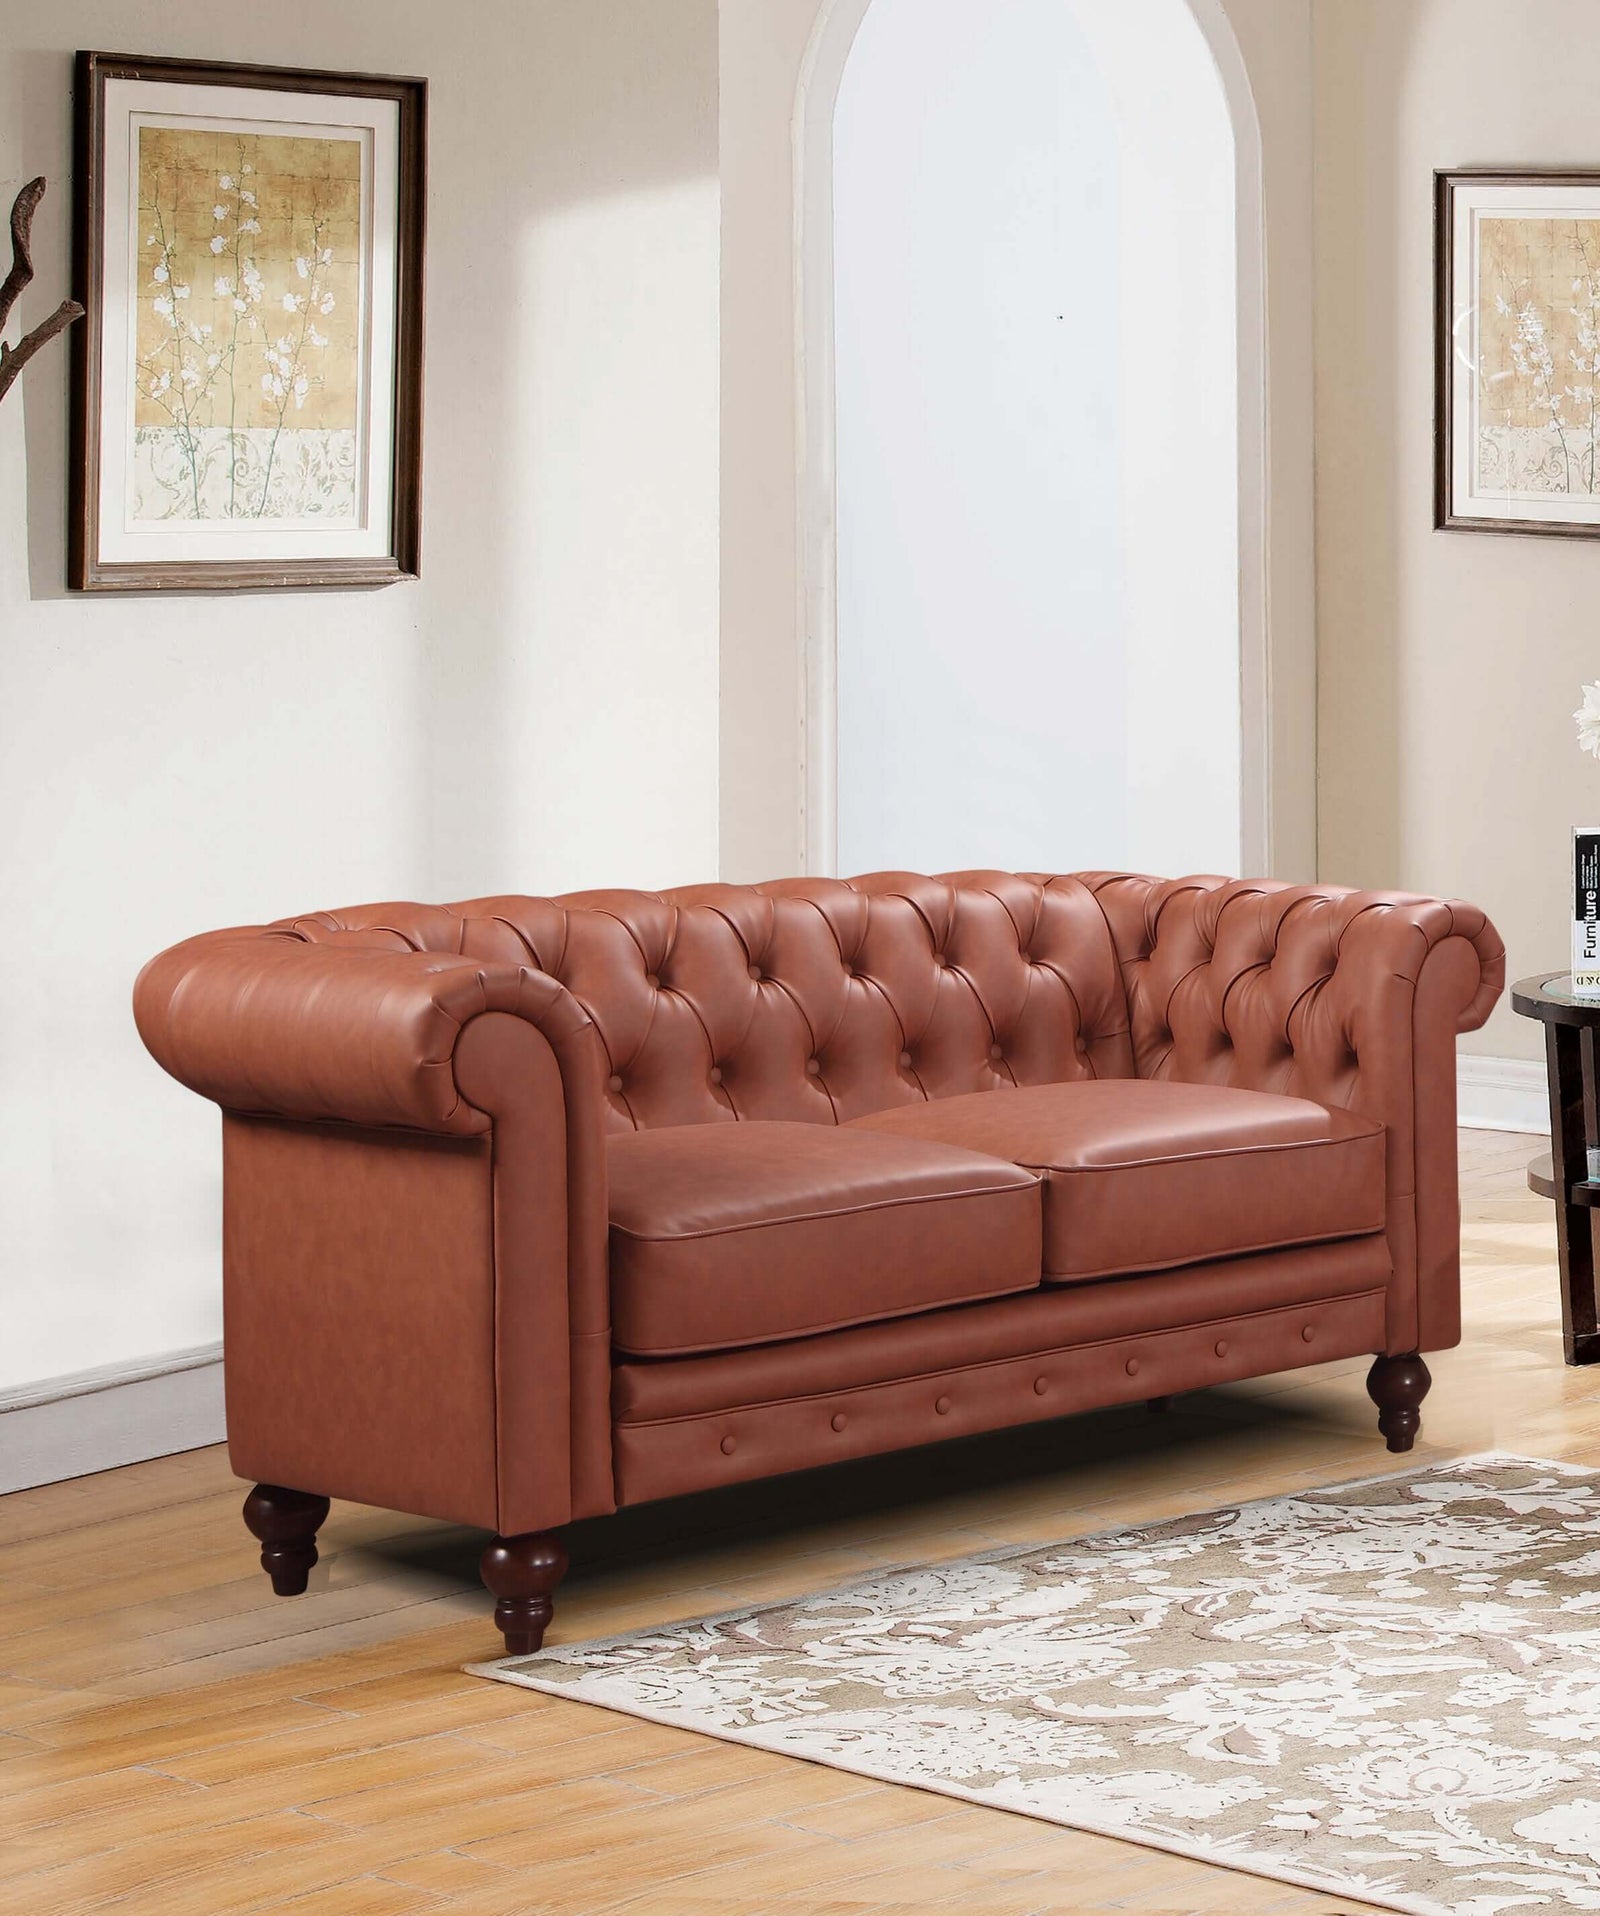 2 Seater Brown Sofa Lounge Chesterfireld Style Button Tufted in Faux Leather-Upinteriors